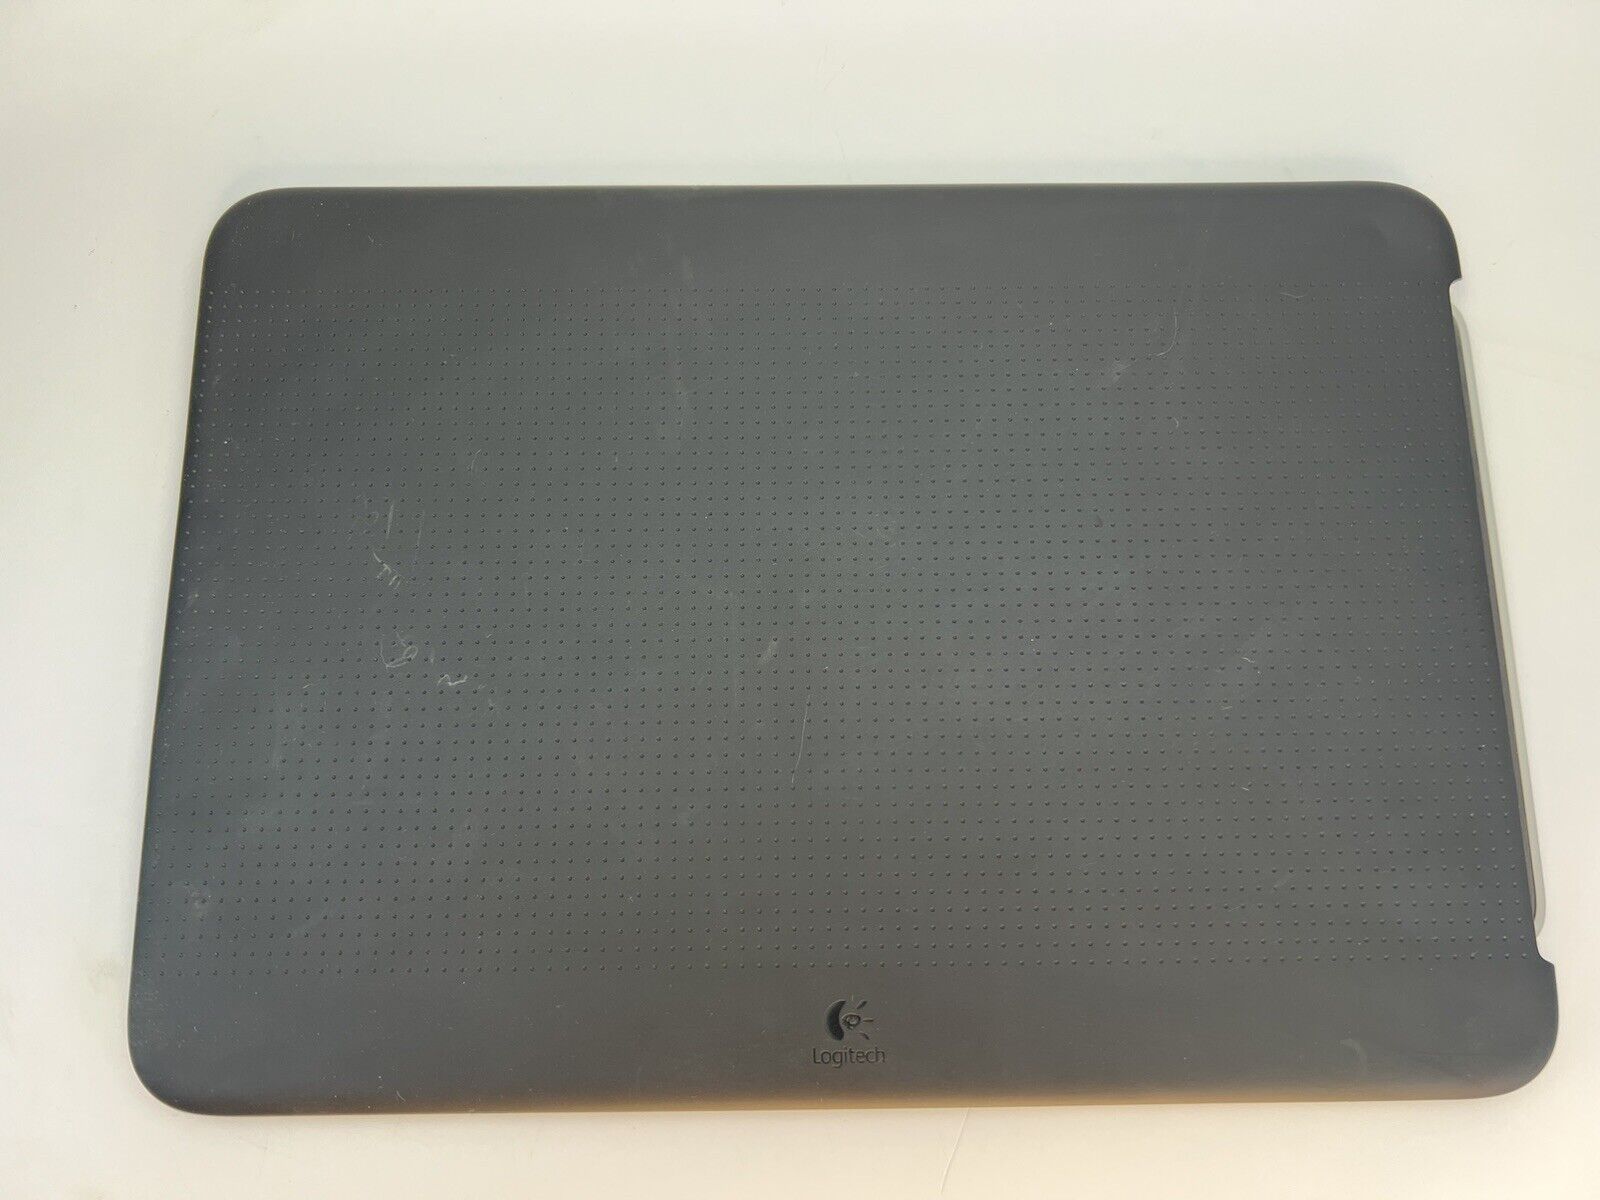 Logitech N315 Portable LapDesk Black With Mouse Pad Gray